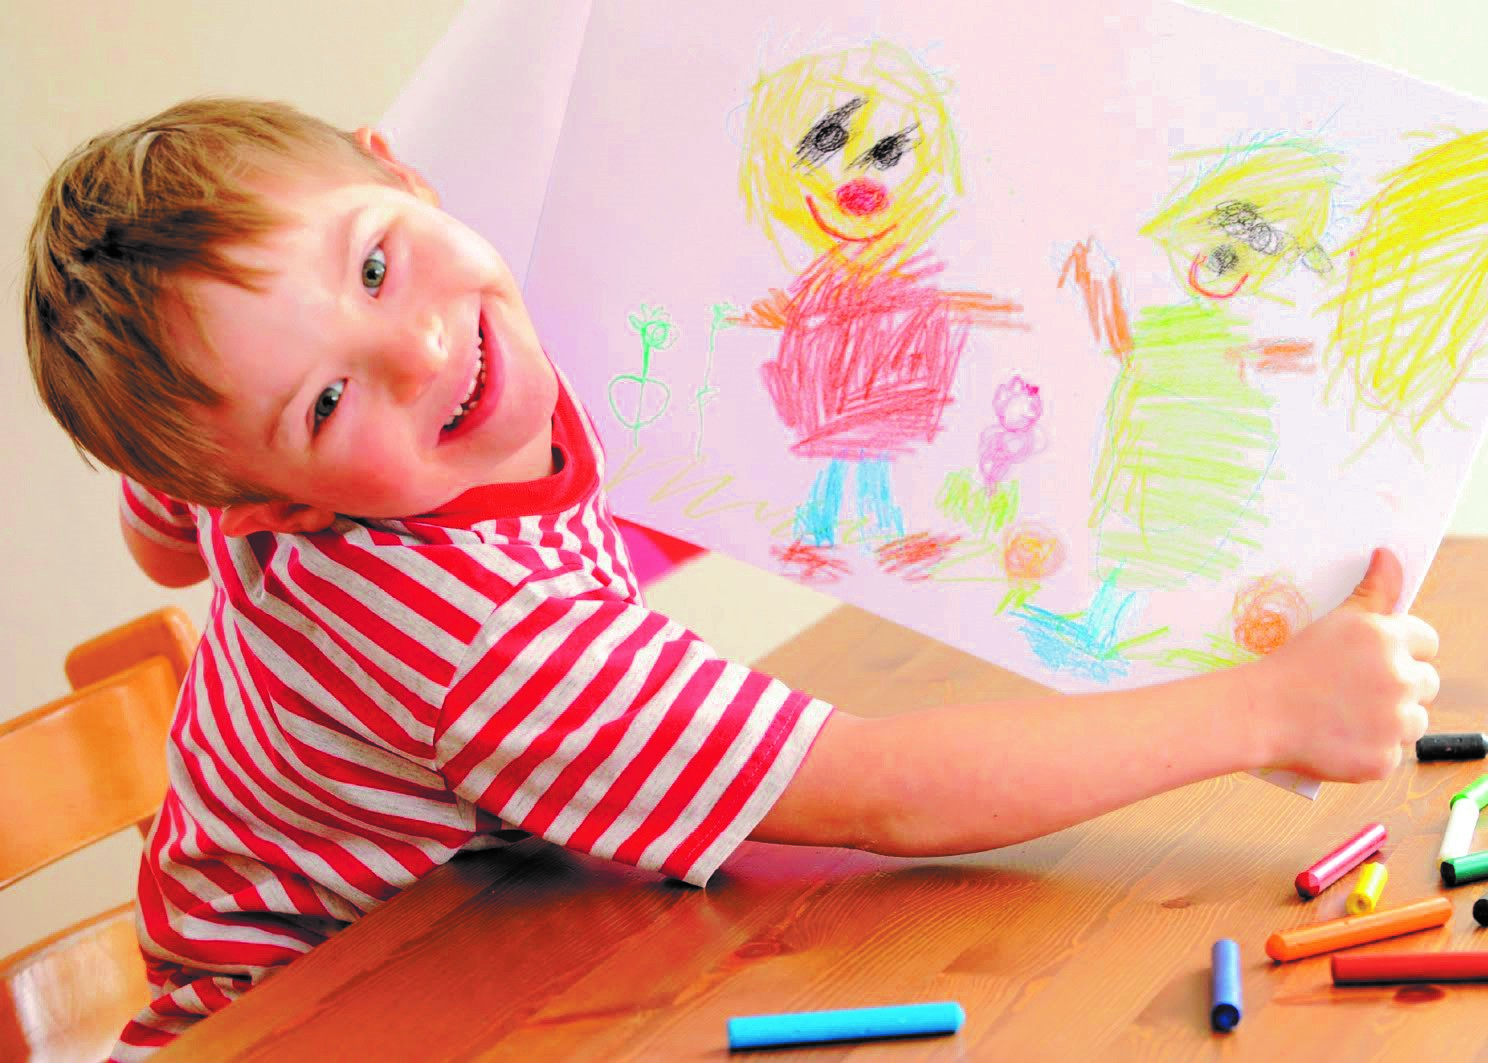 Boy with Special Needs shows his drawing